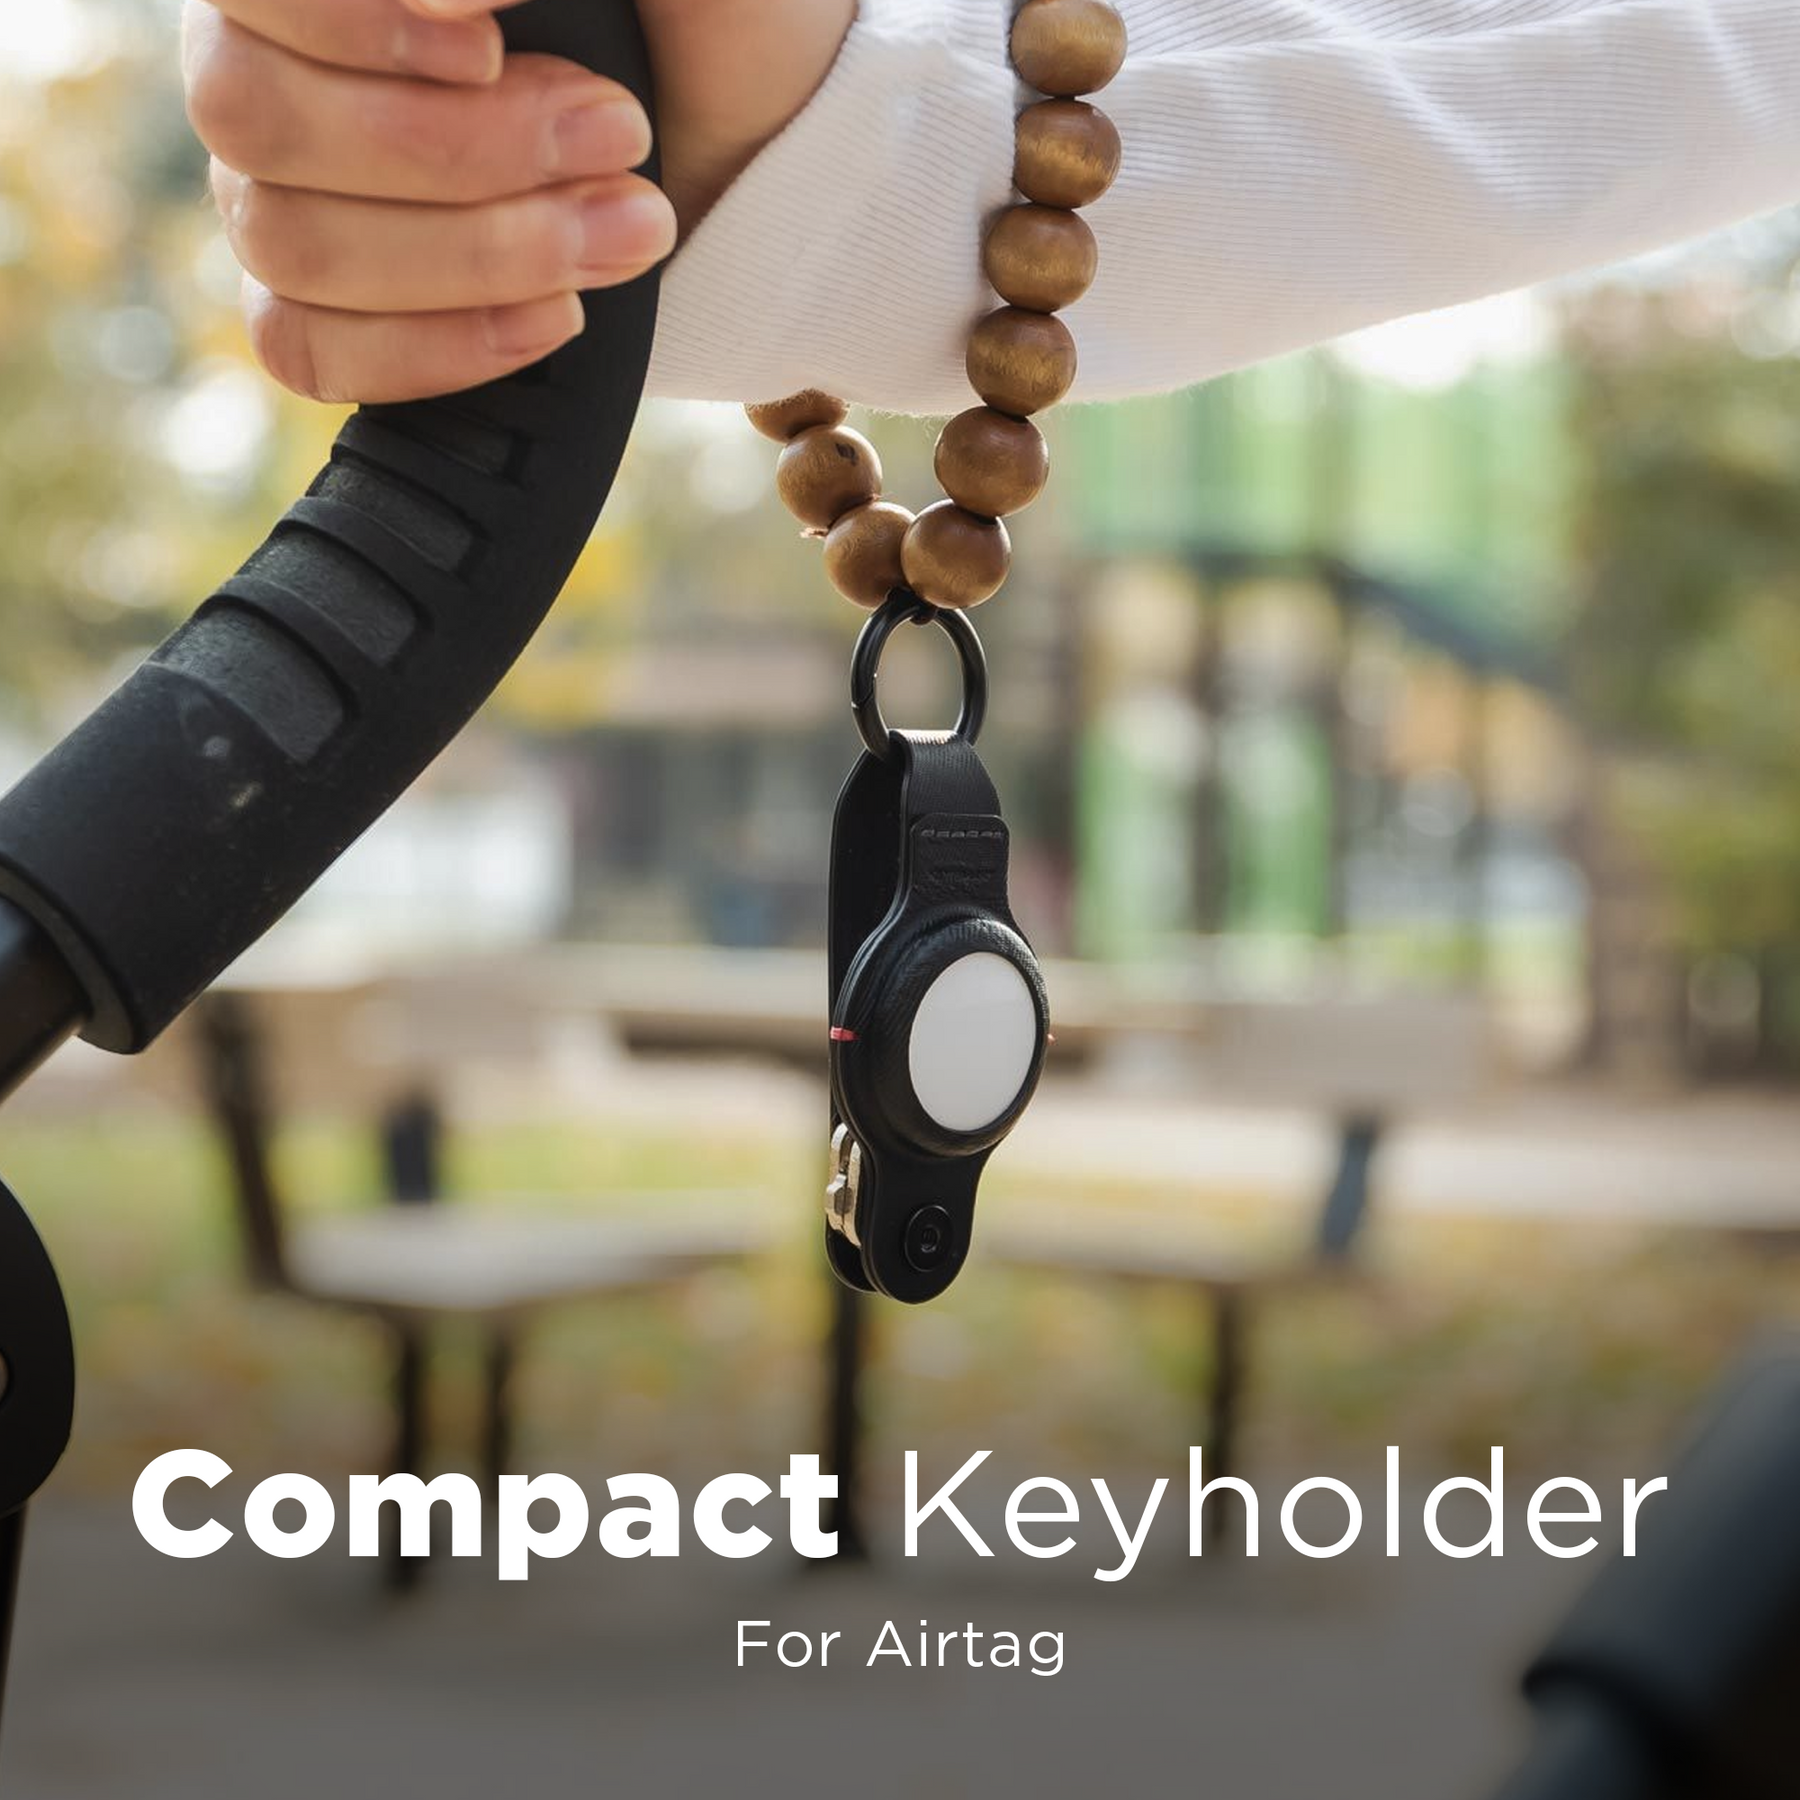 KeySmart Air - Compact Keyholder for Airtag - Key Organizer and Case for  Apple Airtag - Includes Carabiner Keyring Key Chain to Attach Car Key Fob 